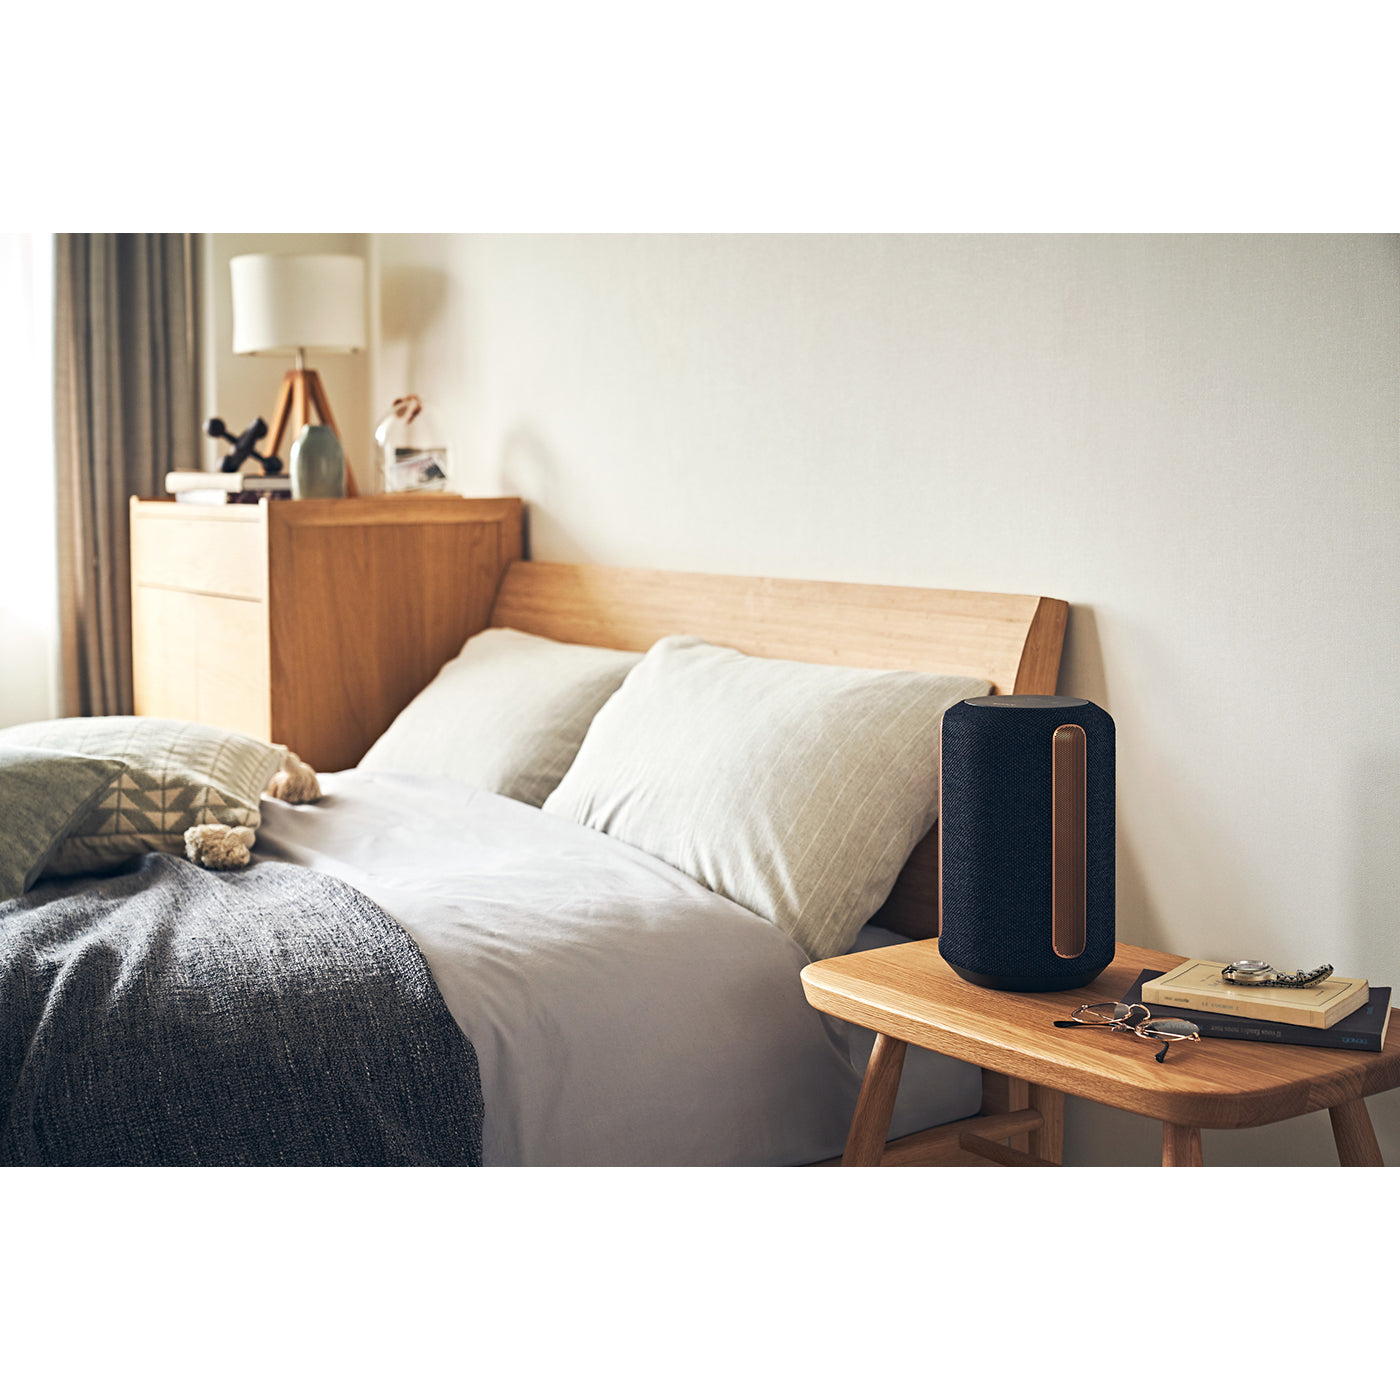 SRS-RA3000 Premium Wireless Speaker with ambient room-filling sound